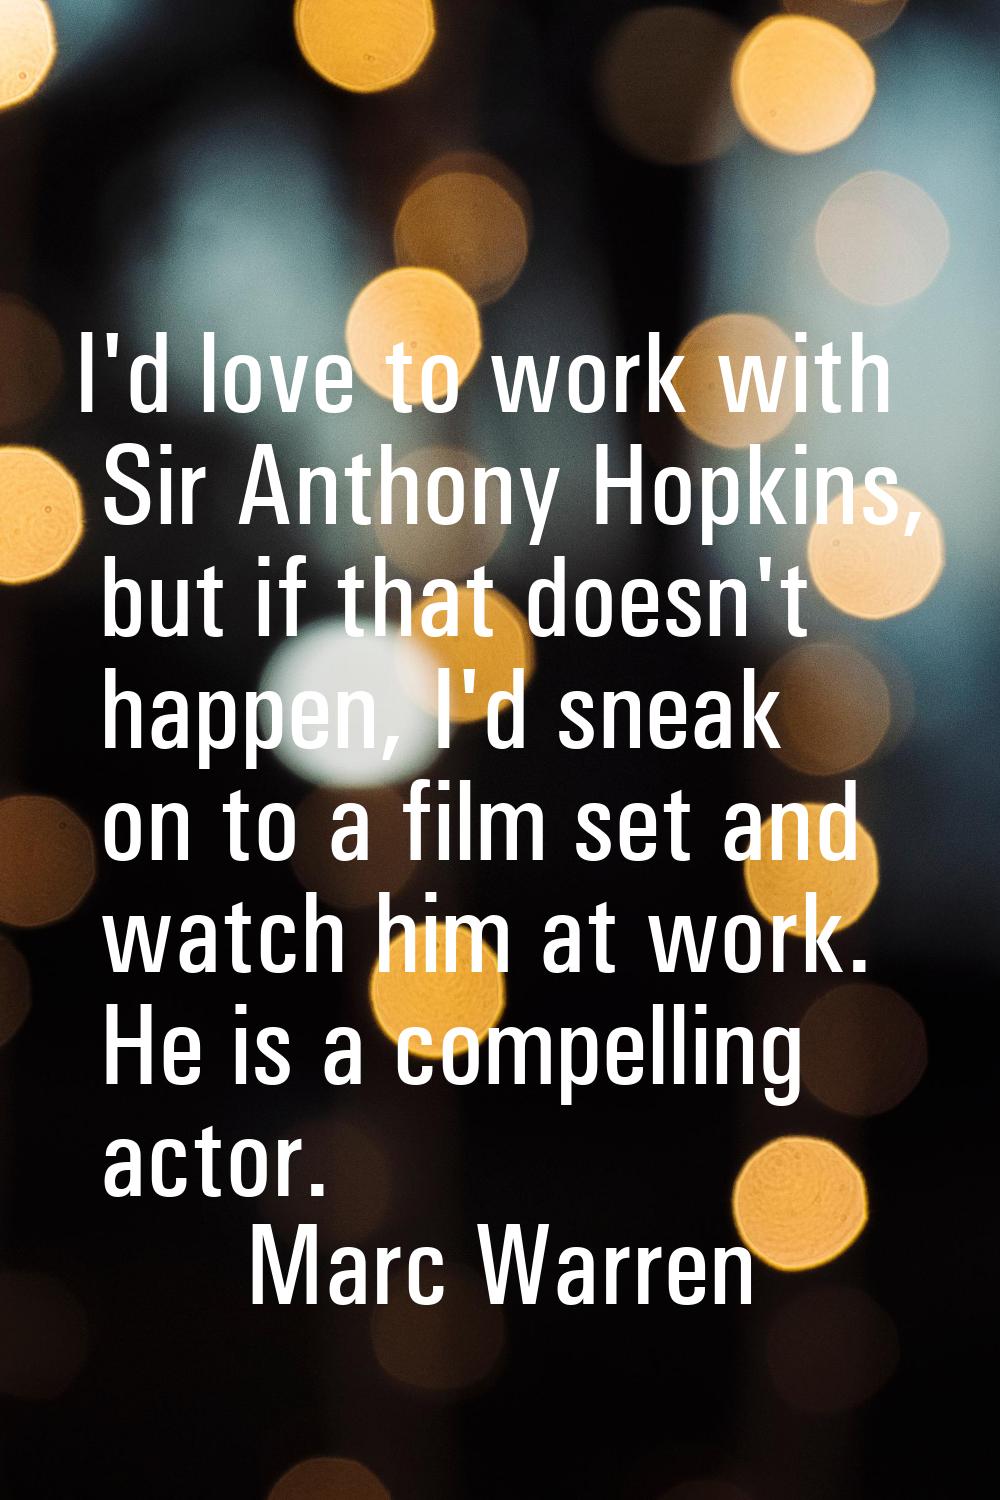 I'd love to work with Sir Anthony Hopkins, but if that doesn't happen, I'd sneak on to a film set a